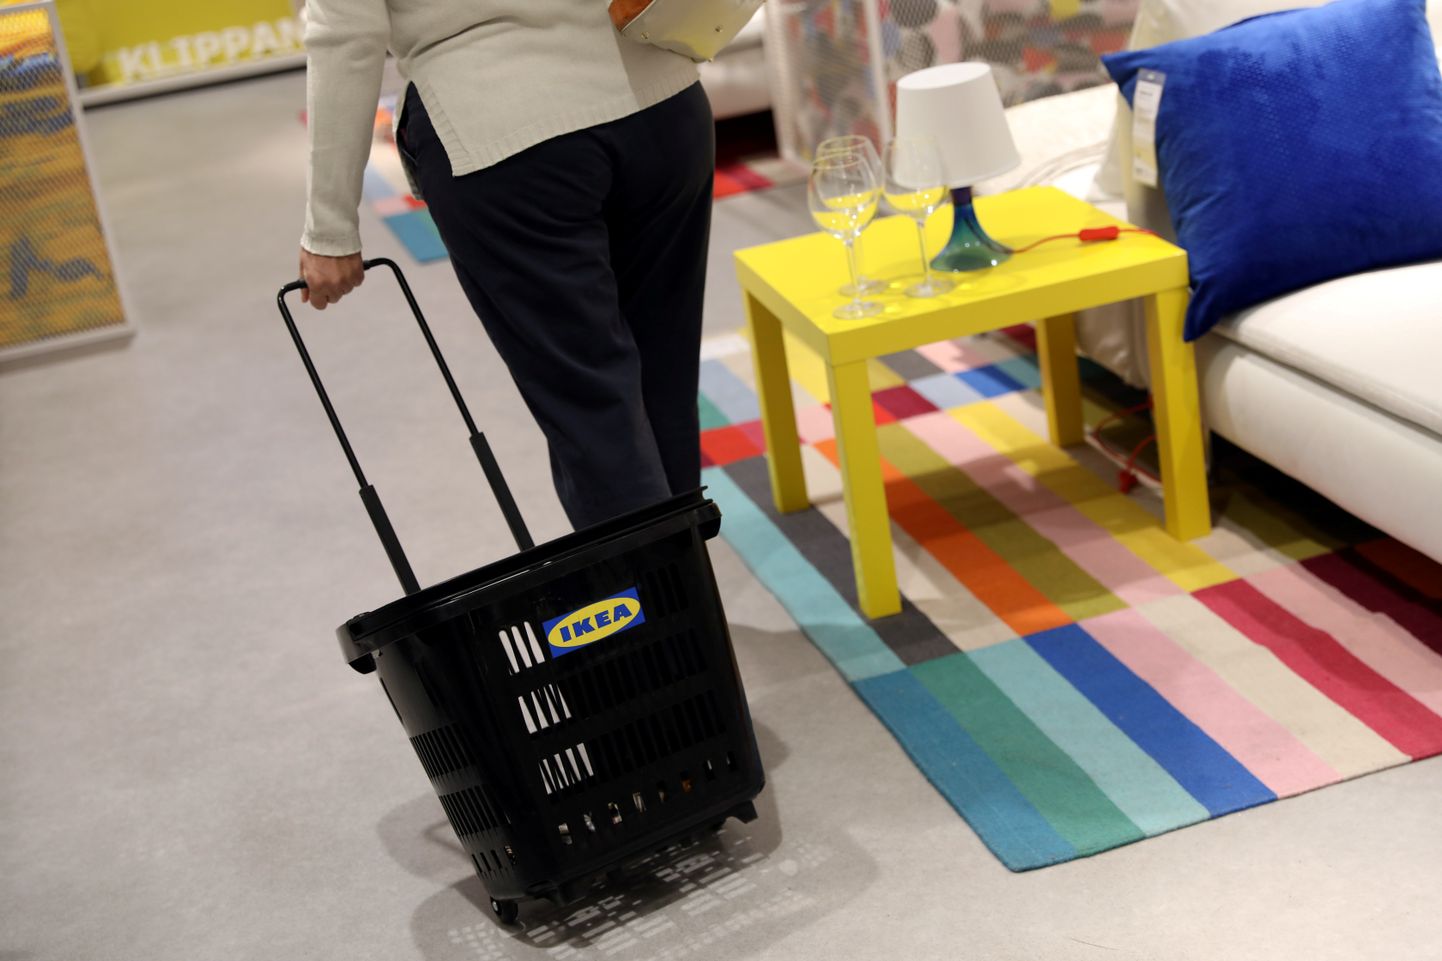 FILE PHOTO: A customer shops at an IKEA store in Madrid, Spain, October 10, 2018. REUTERS/Susana Vera/File Photo